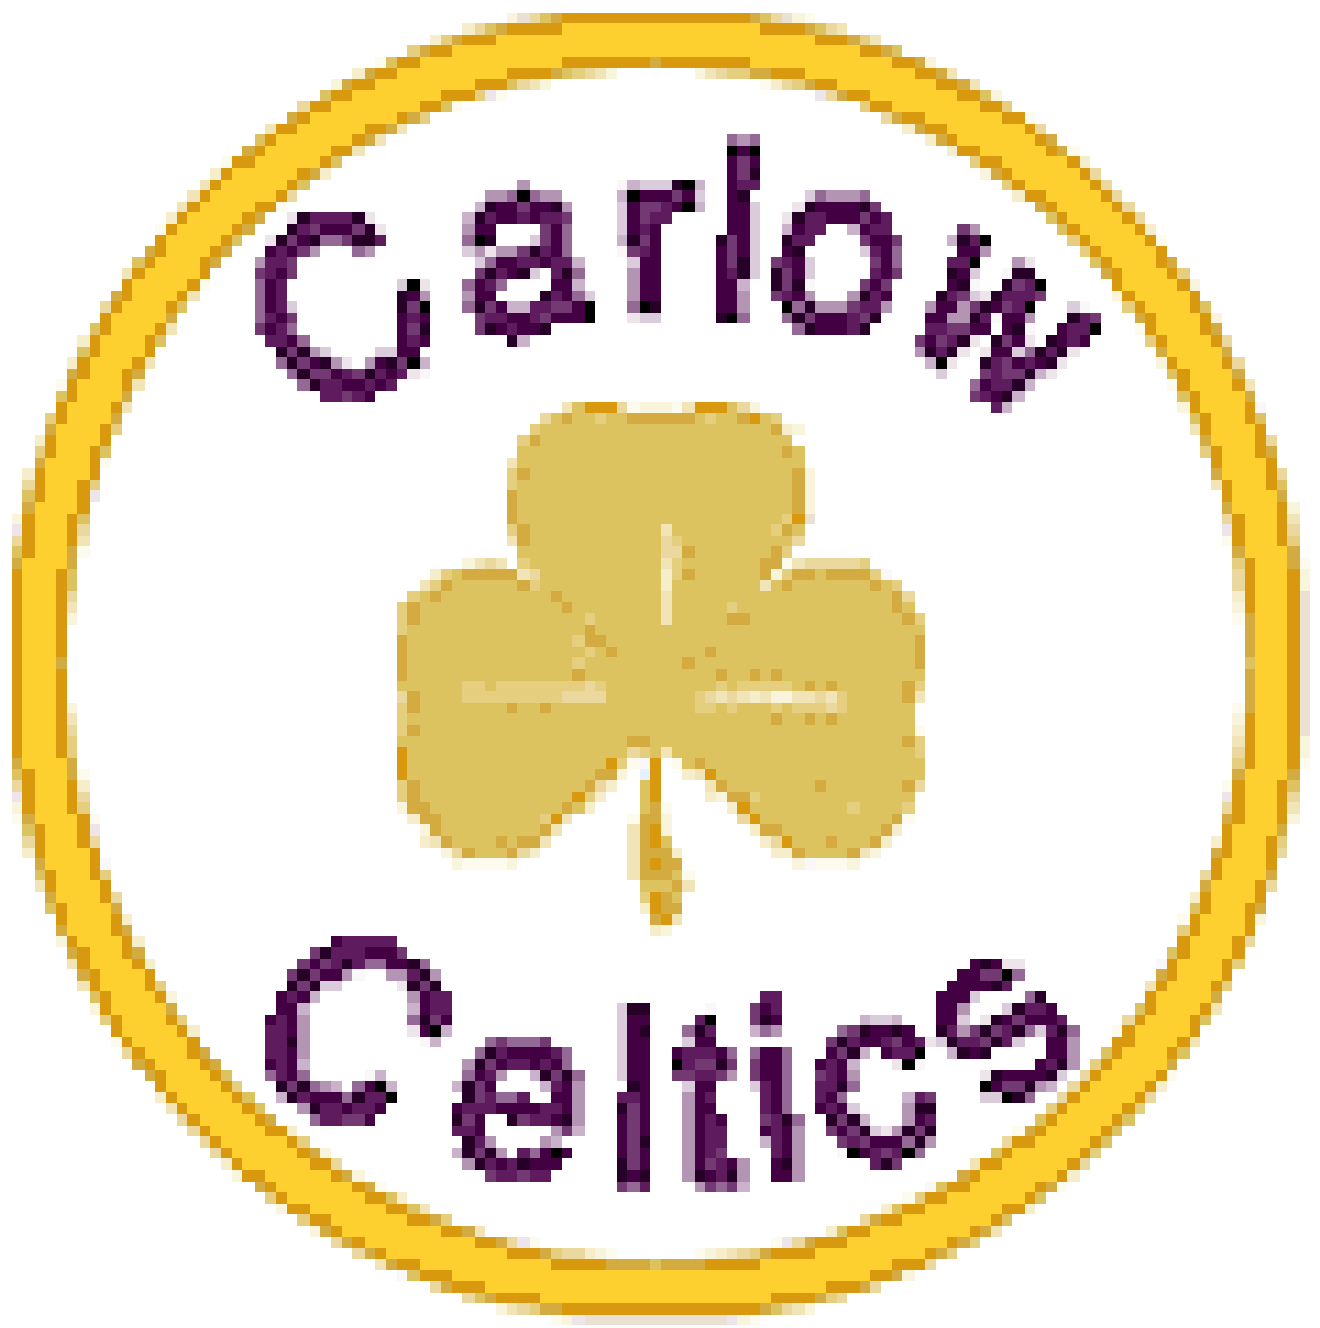 Carlow University Information About Carlow University Find Colleges